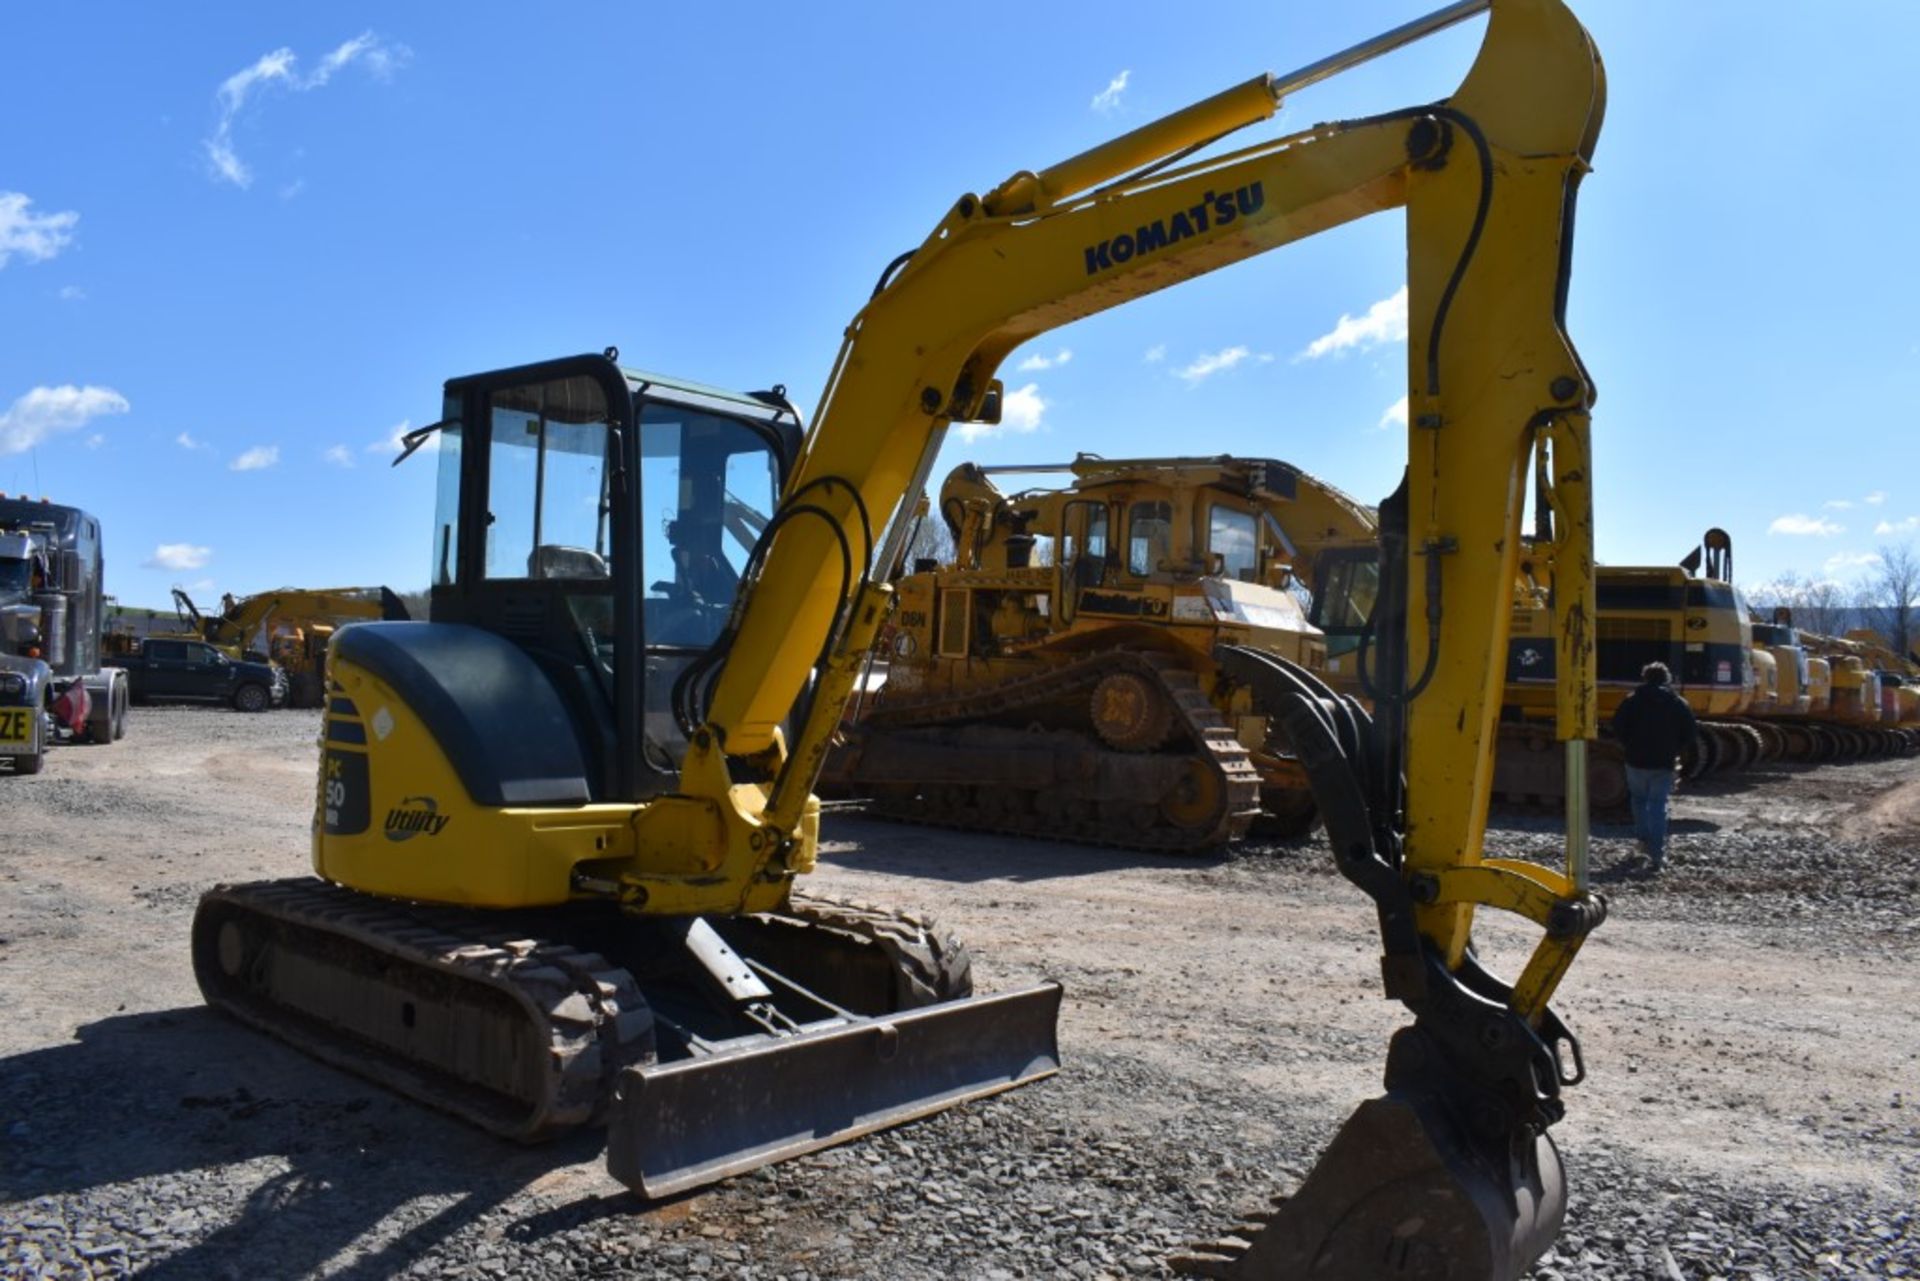 Komatsu PC50MR-2 Excavator 6643 Hours, Runs and Operates, WB 24" Bucket, WB Quick Coupler, Auxiliary - Image 7 of 44